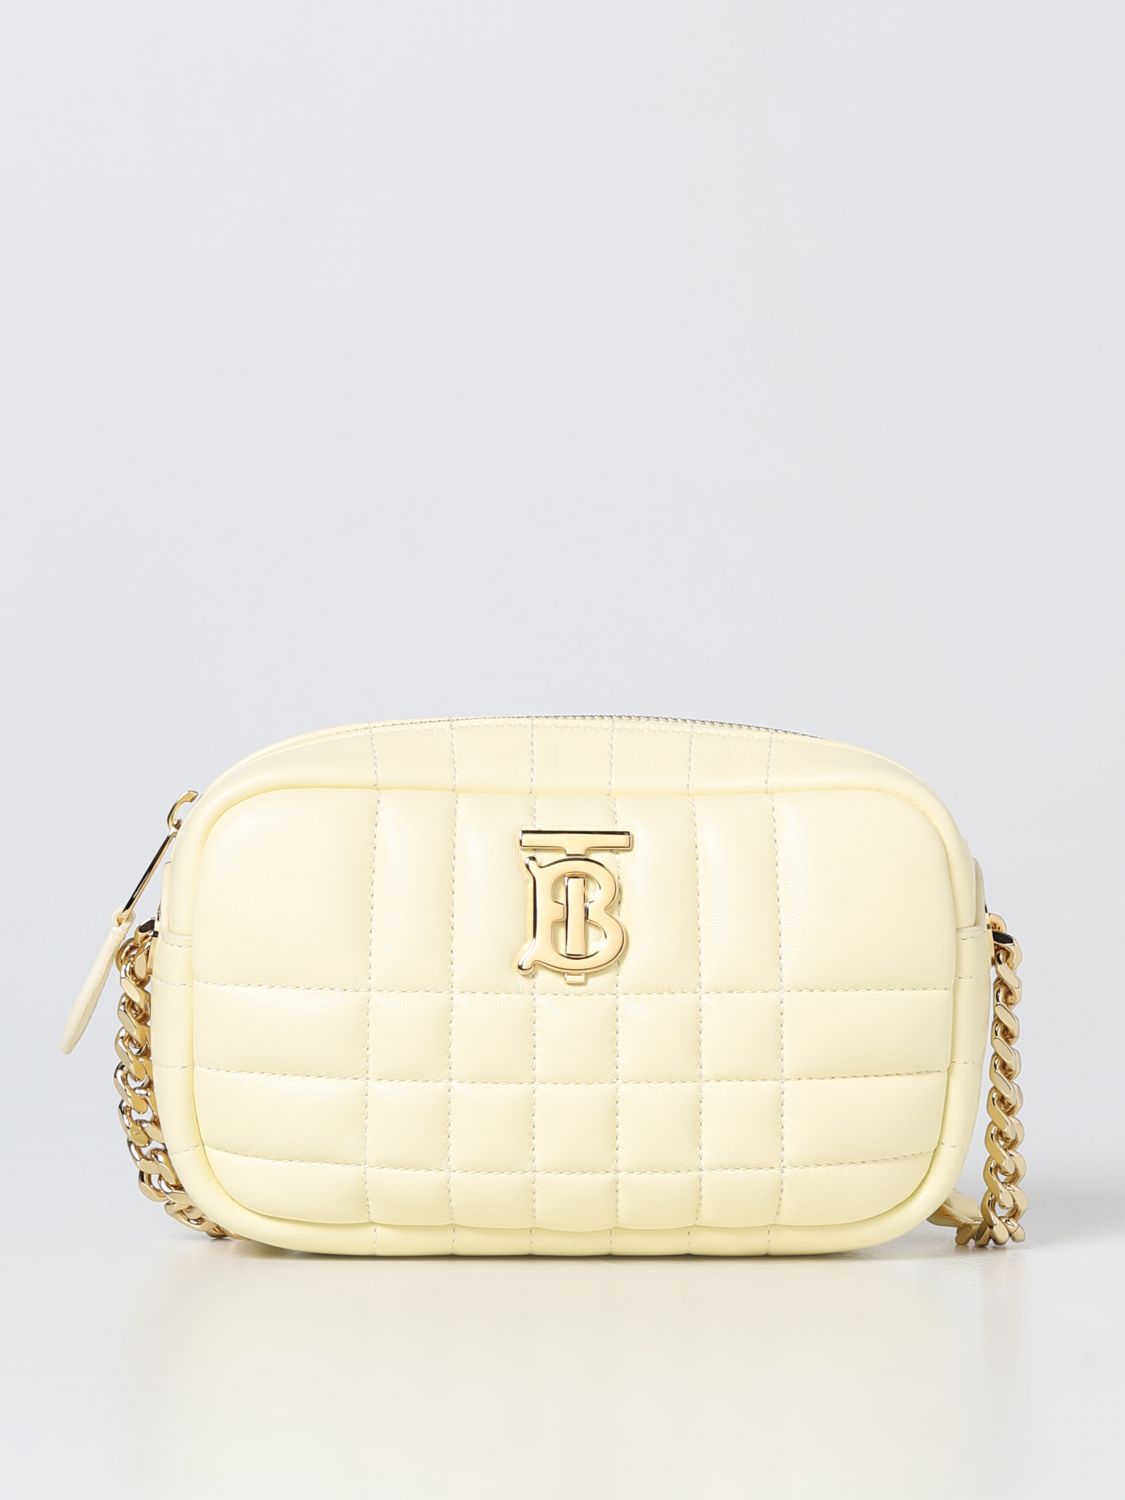 chanel bags outlet sale